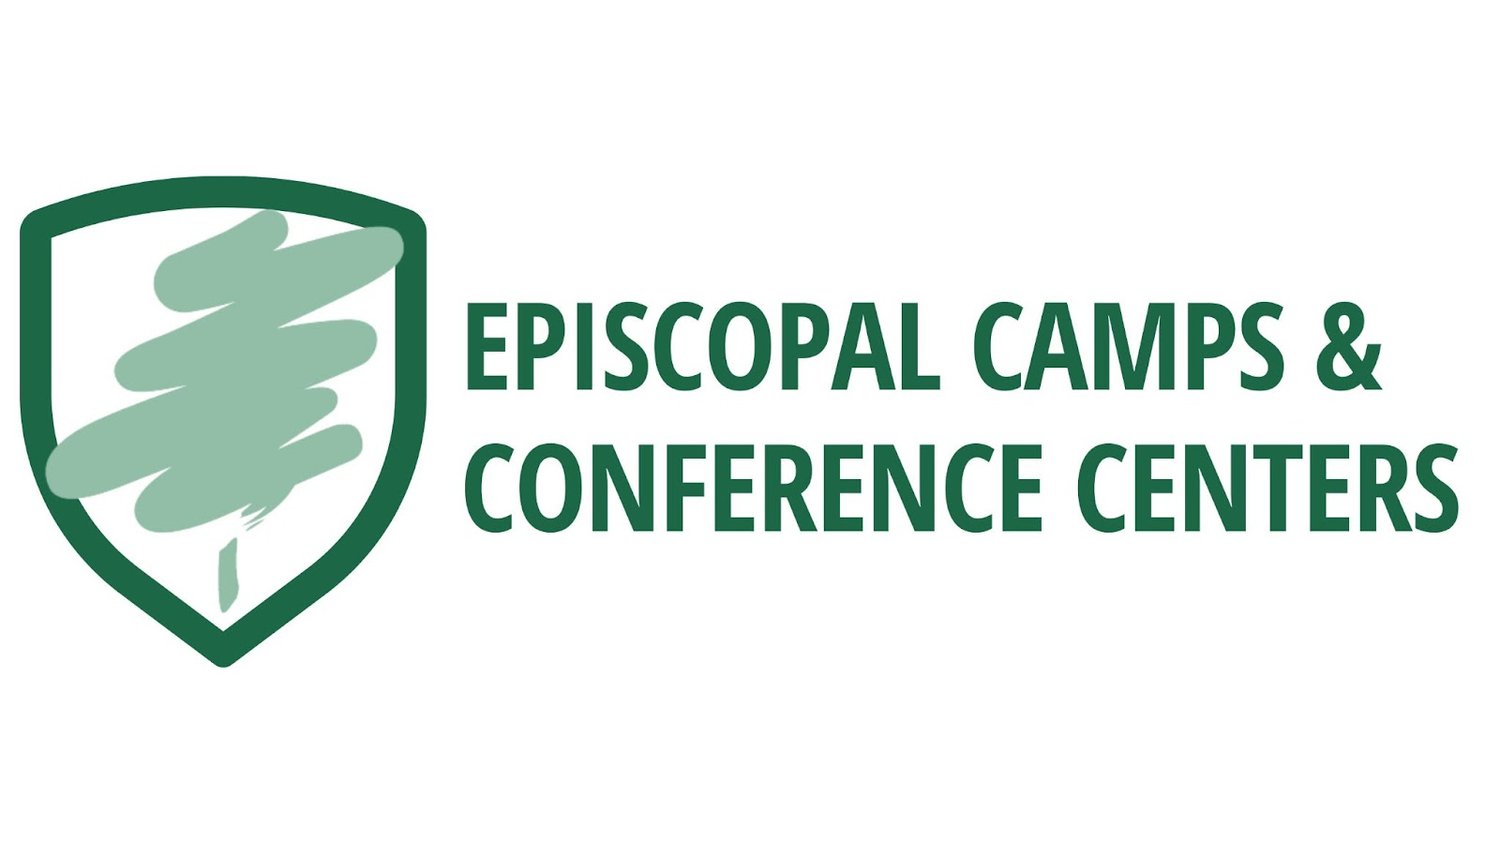 EPISCOPAL CAMPS &amp; CONFERENCE CENTERS (Copy)